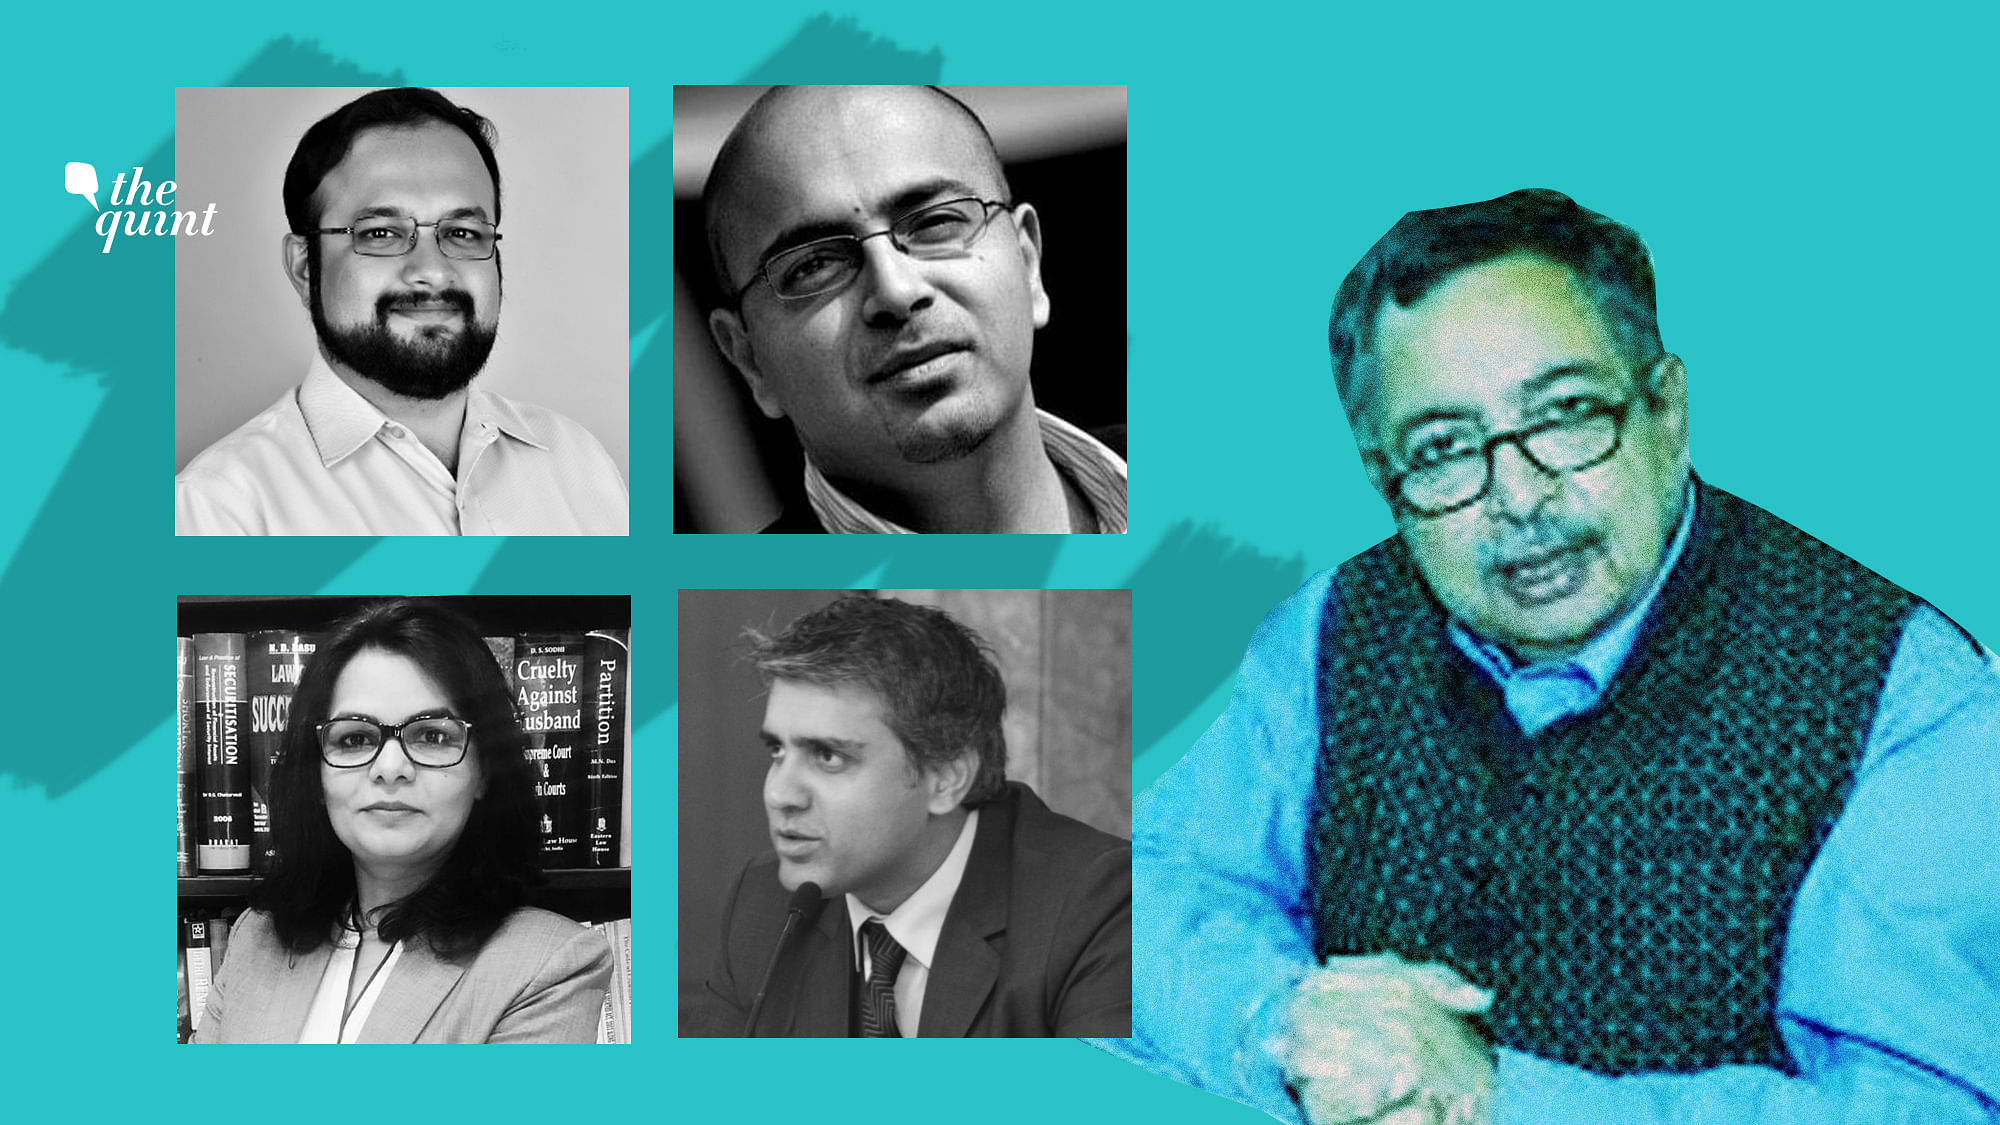 The Quint spoke to legal experts on the Supreme Court's order on journalist Vinod Dua.